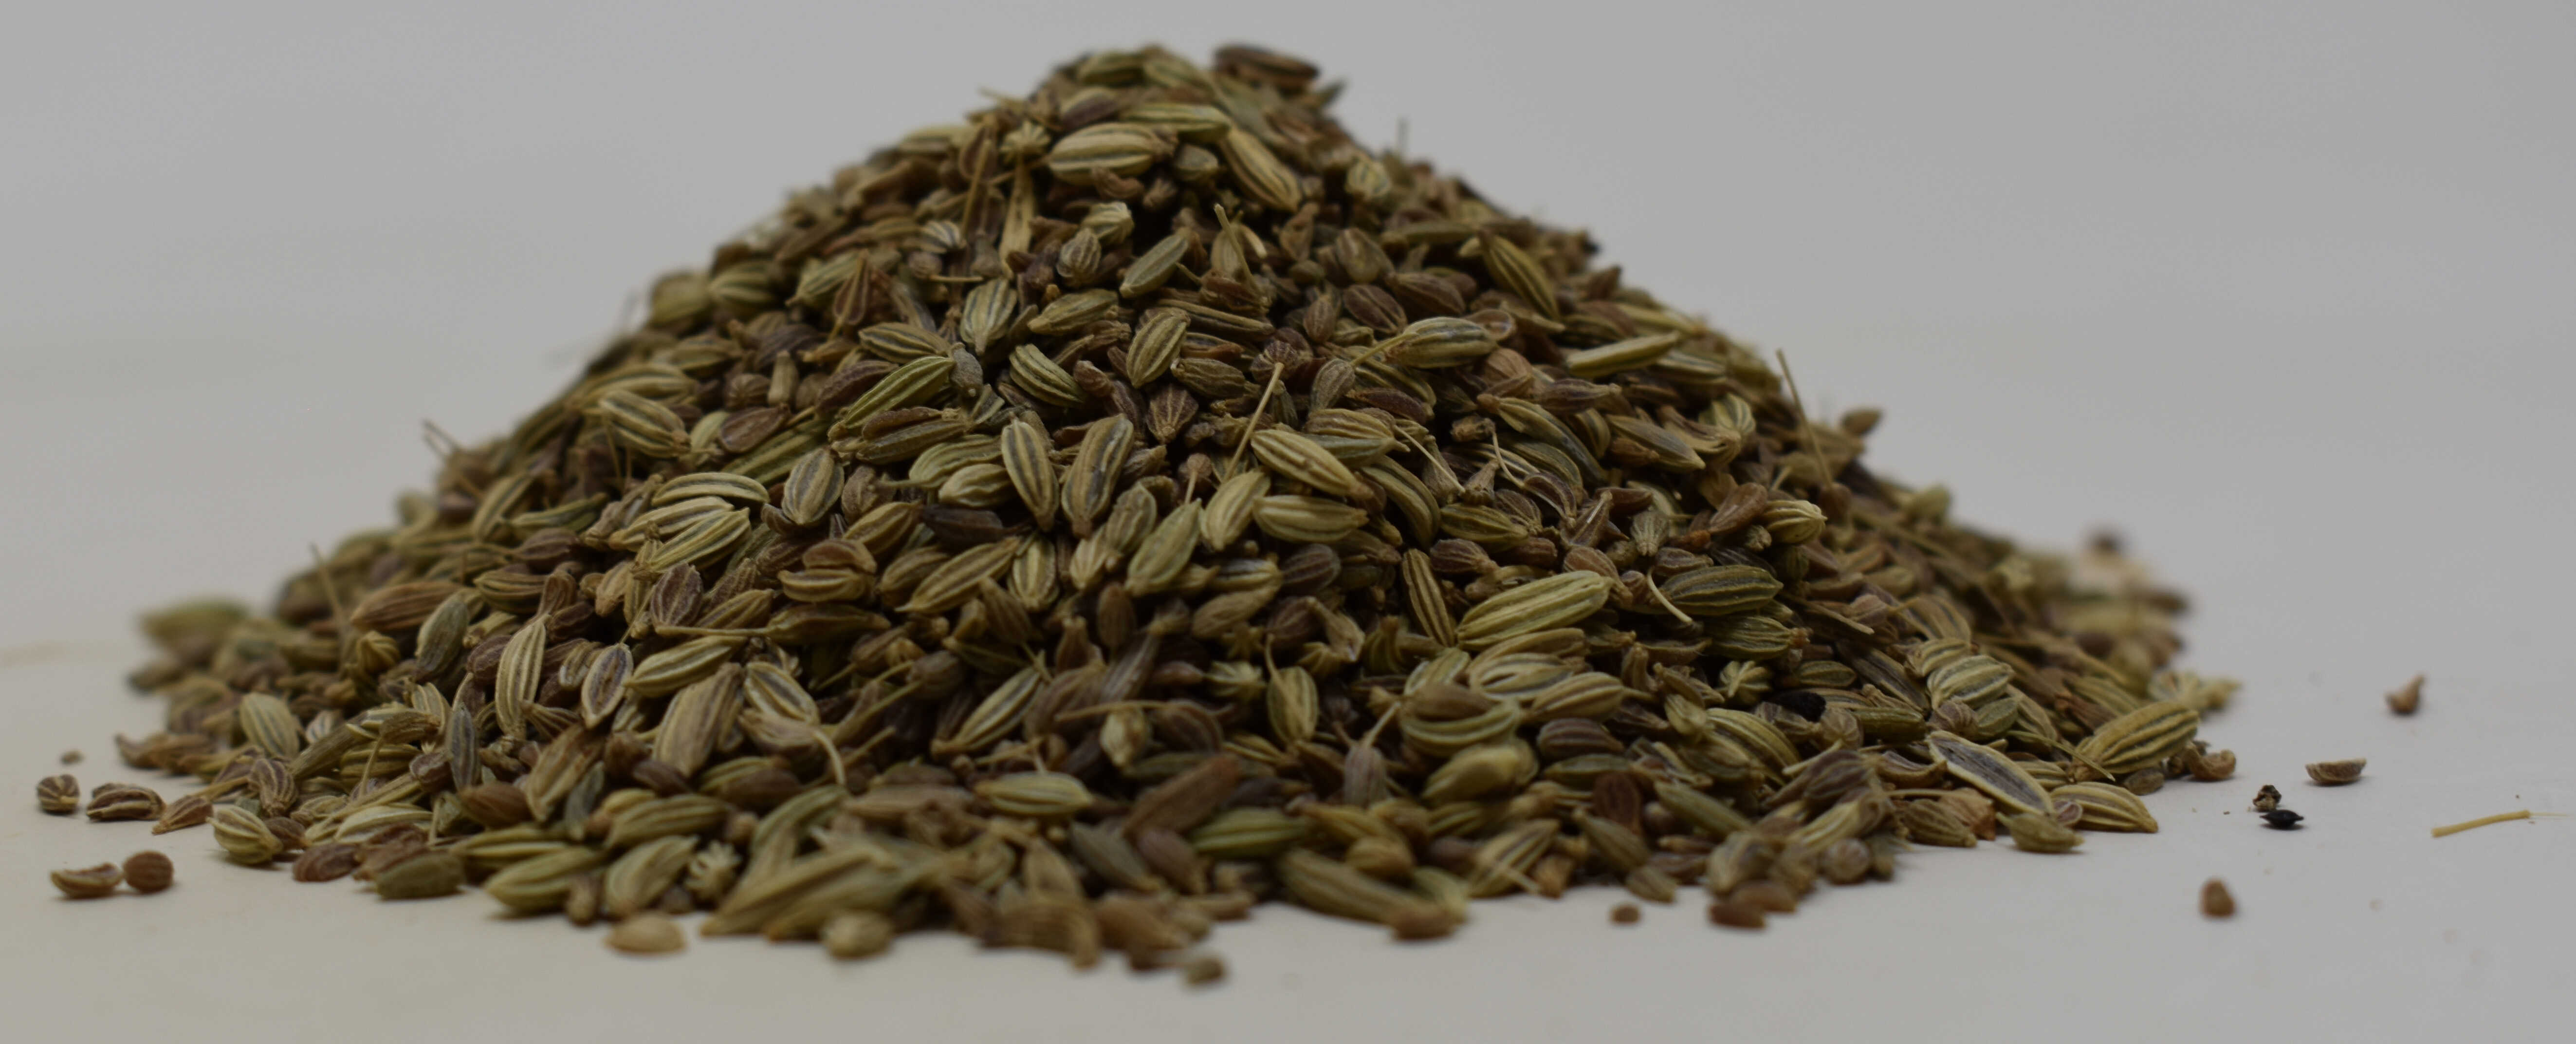 Anise Seed and Fennel - Side Photo